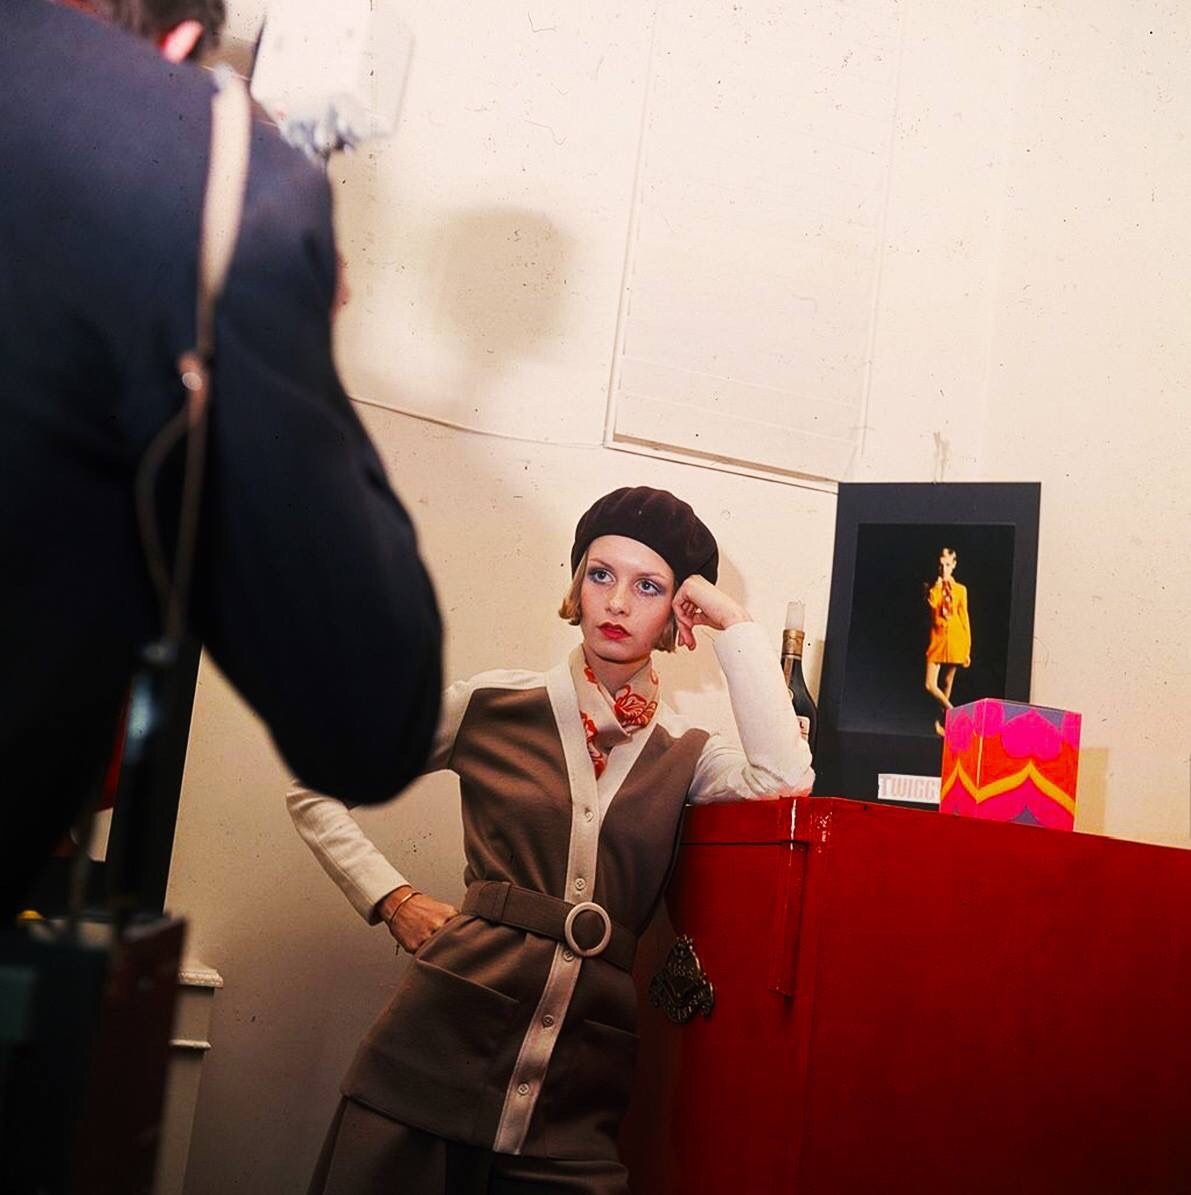 Twiggy, (Lesley Hornby), being photographed wearing a beret, matching cardigan and scarf in 1967